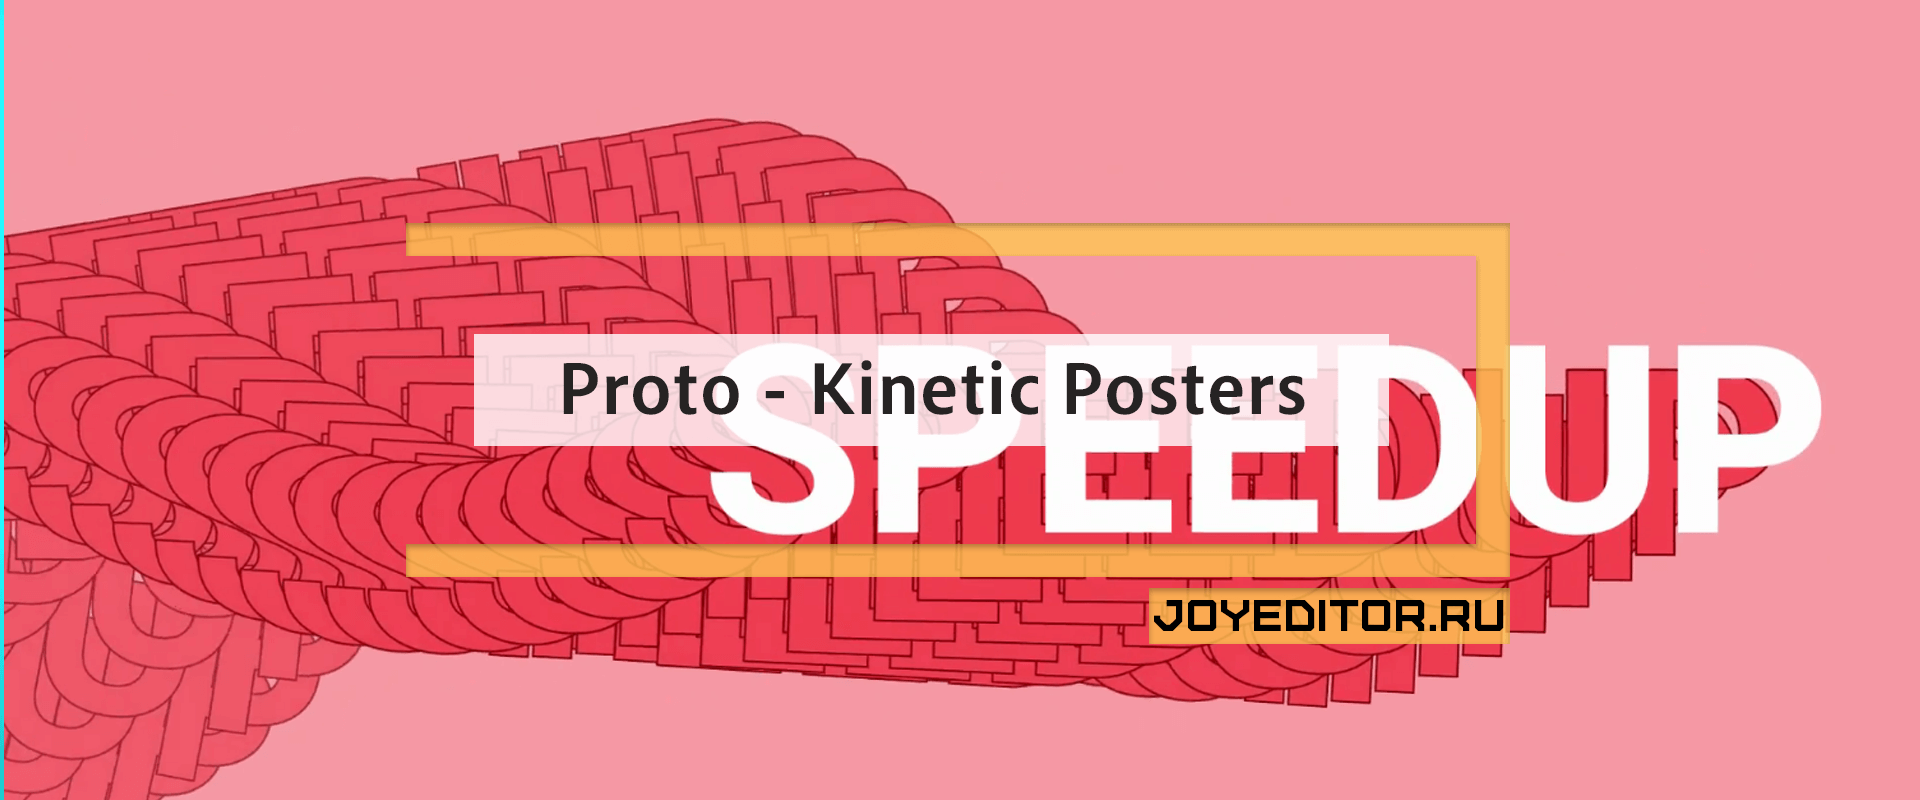 Proto - Kinetic Posters